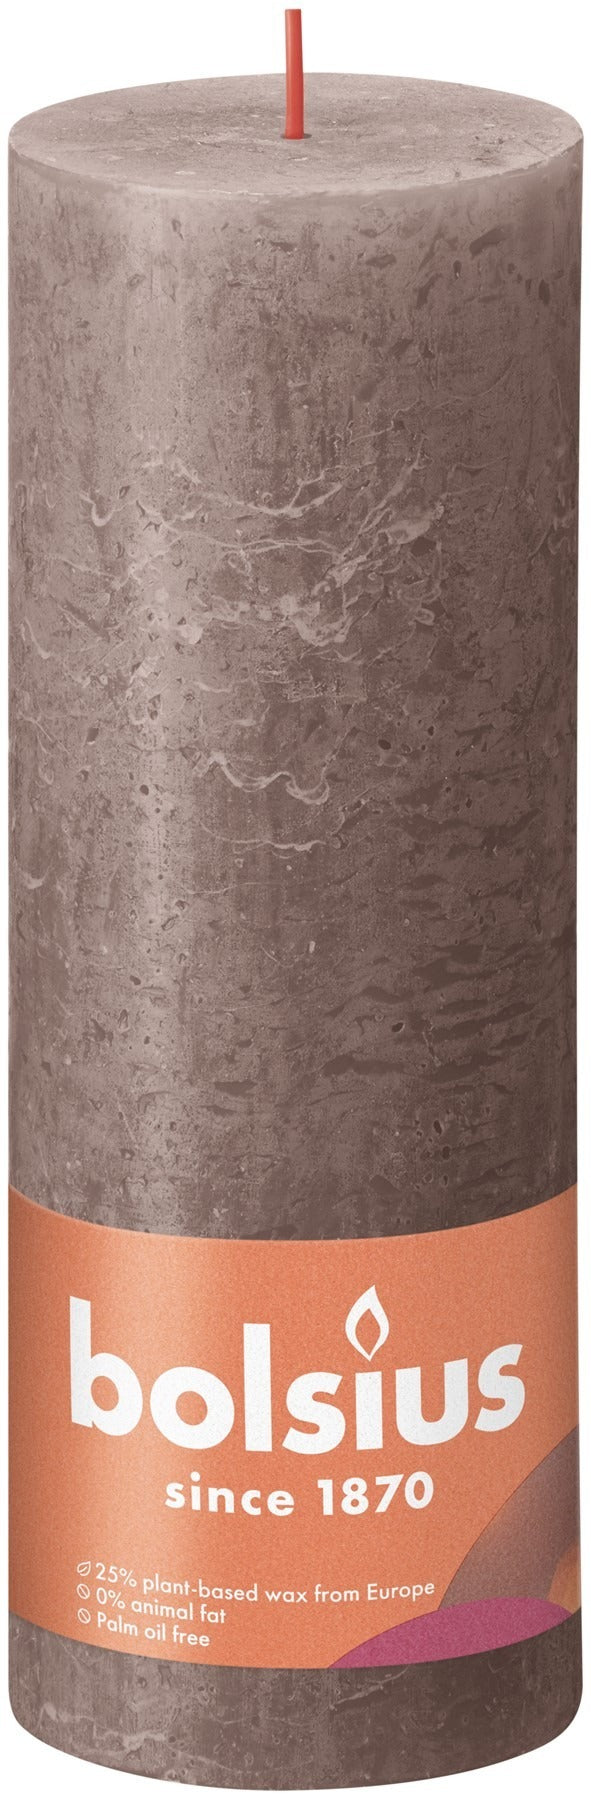 View Bolsius Rustic Shine Rustic Taupe Pillar Candle 190mm x 68mm information